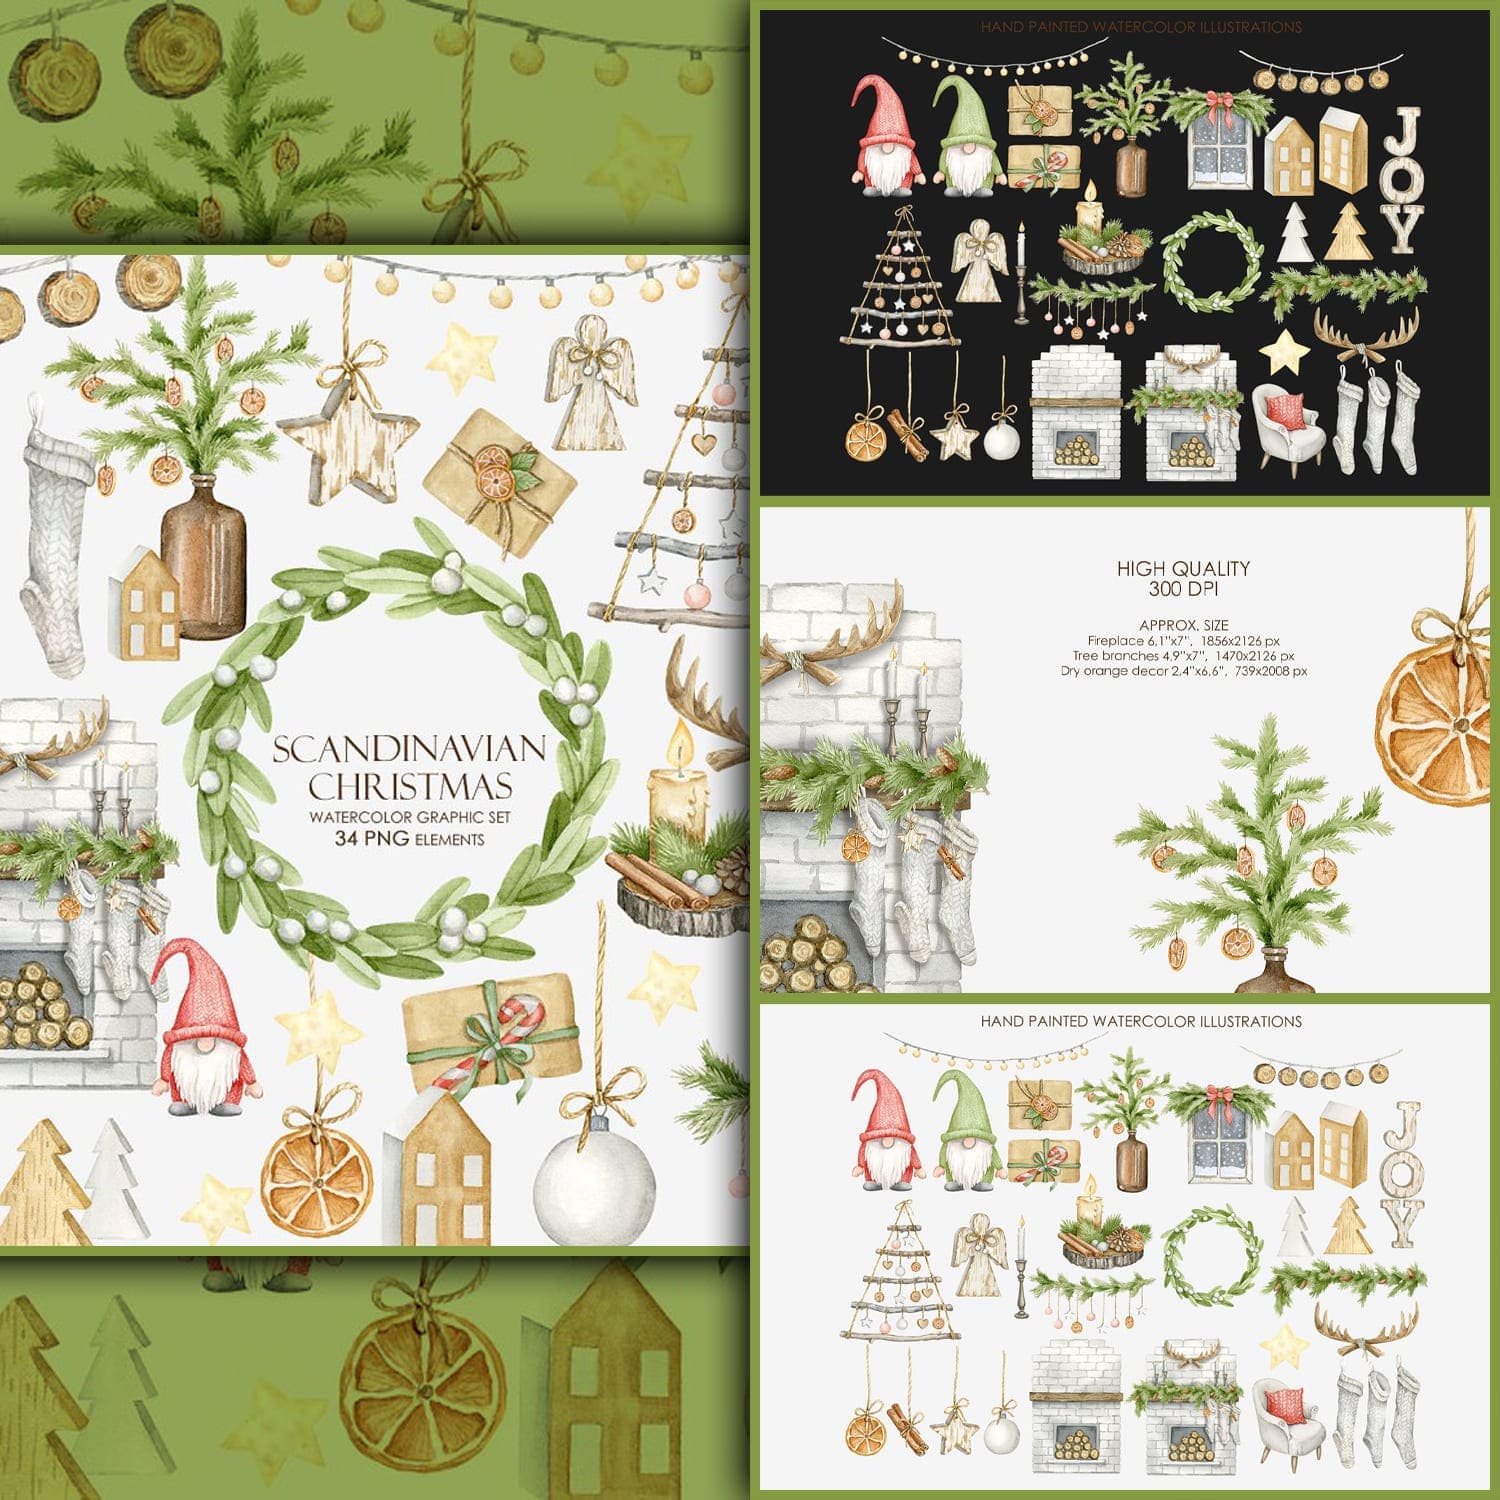 Watercolor rustic christmas clipart, second picture 1500x1500.